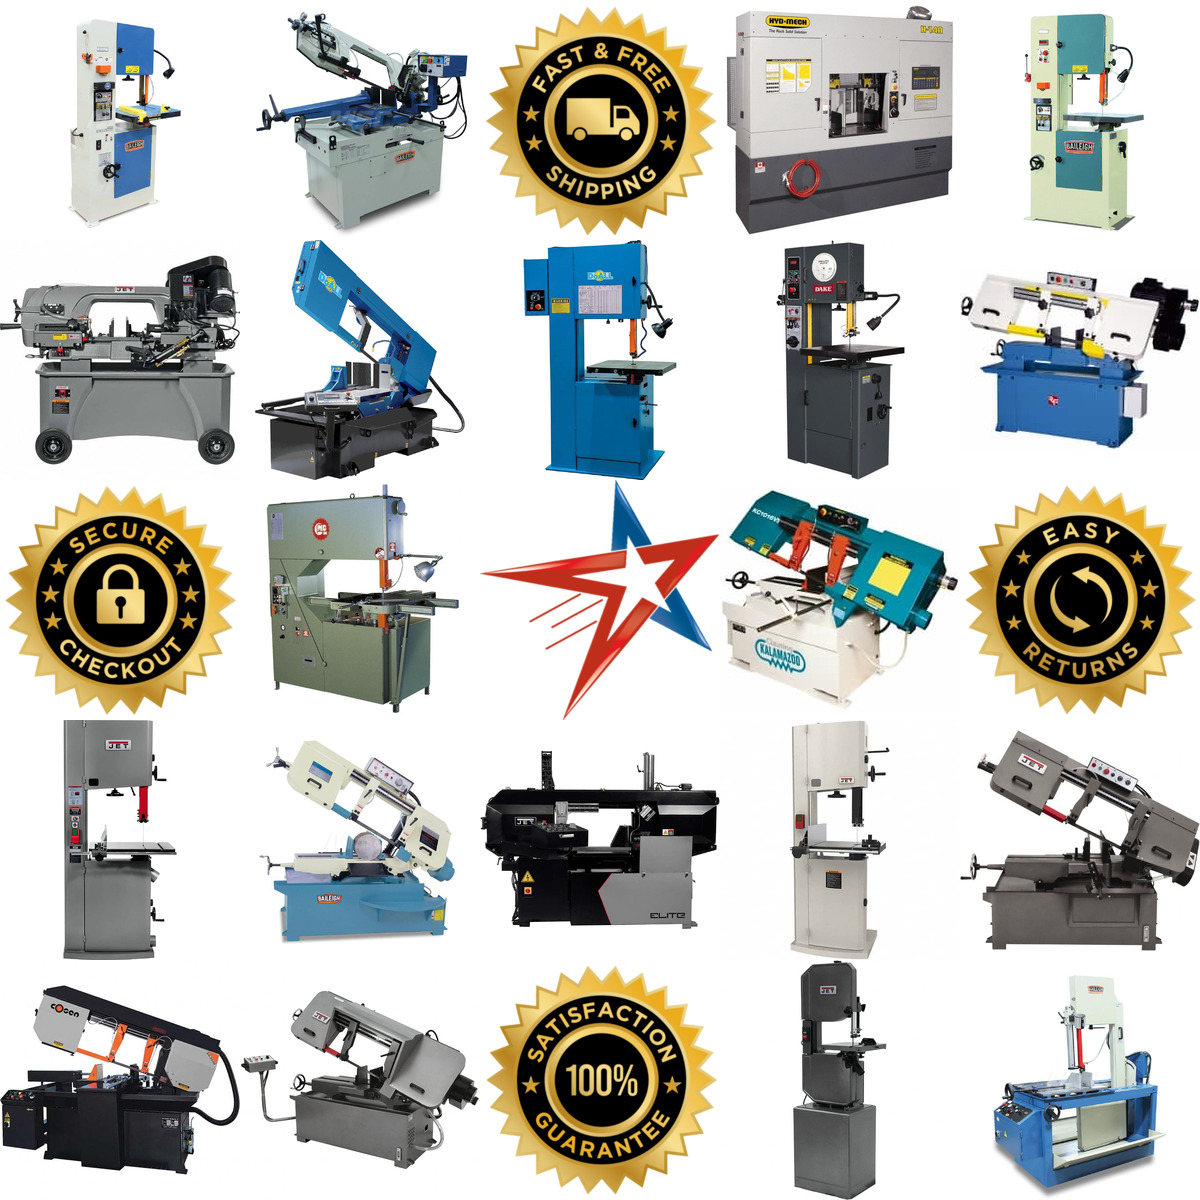 A selection of Bandsaws products on GoVets